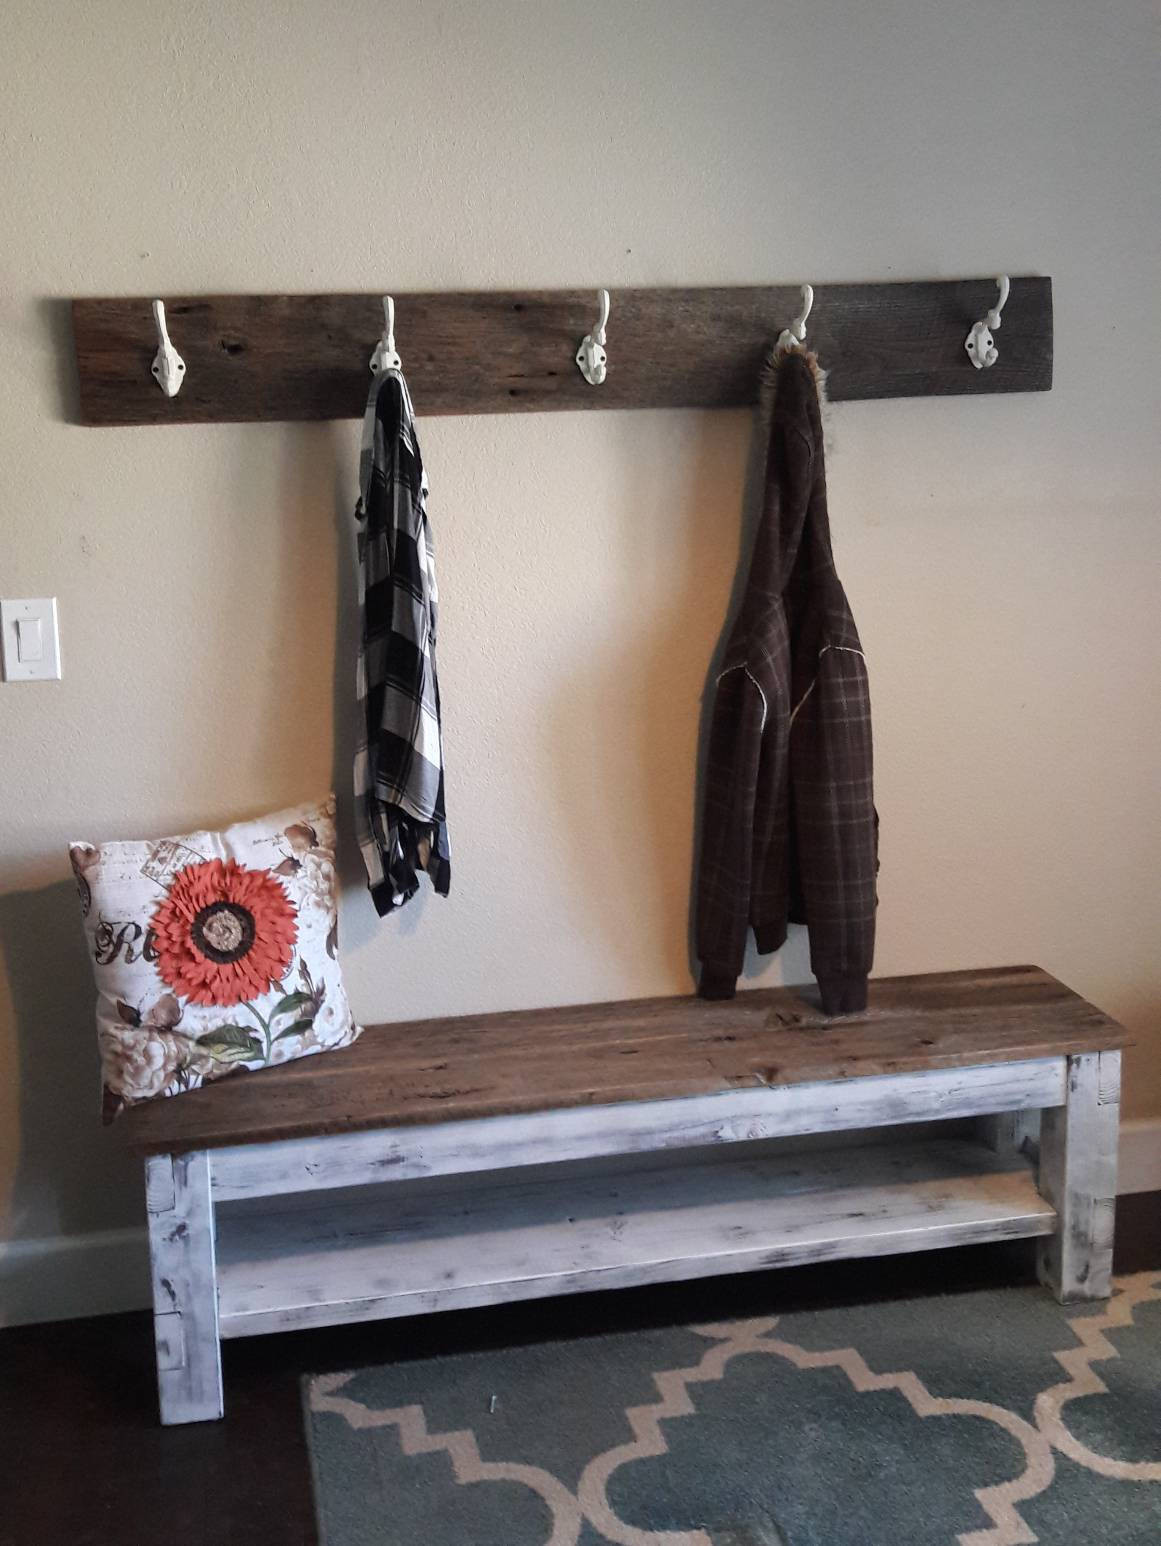 Farmhouse Bench With Storage
 Entryway bench Farmhouse storage bench shoe storage bench